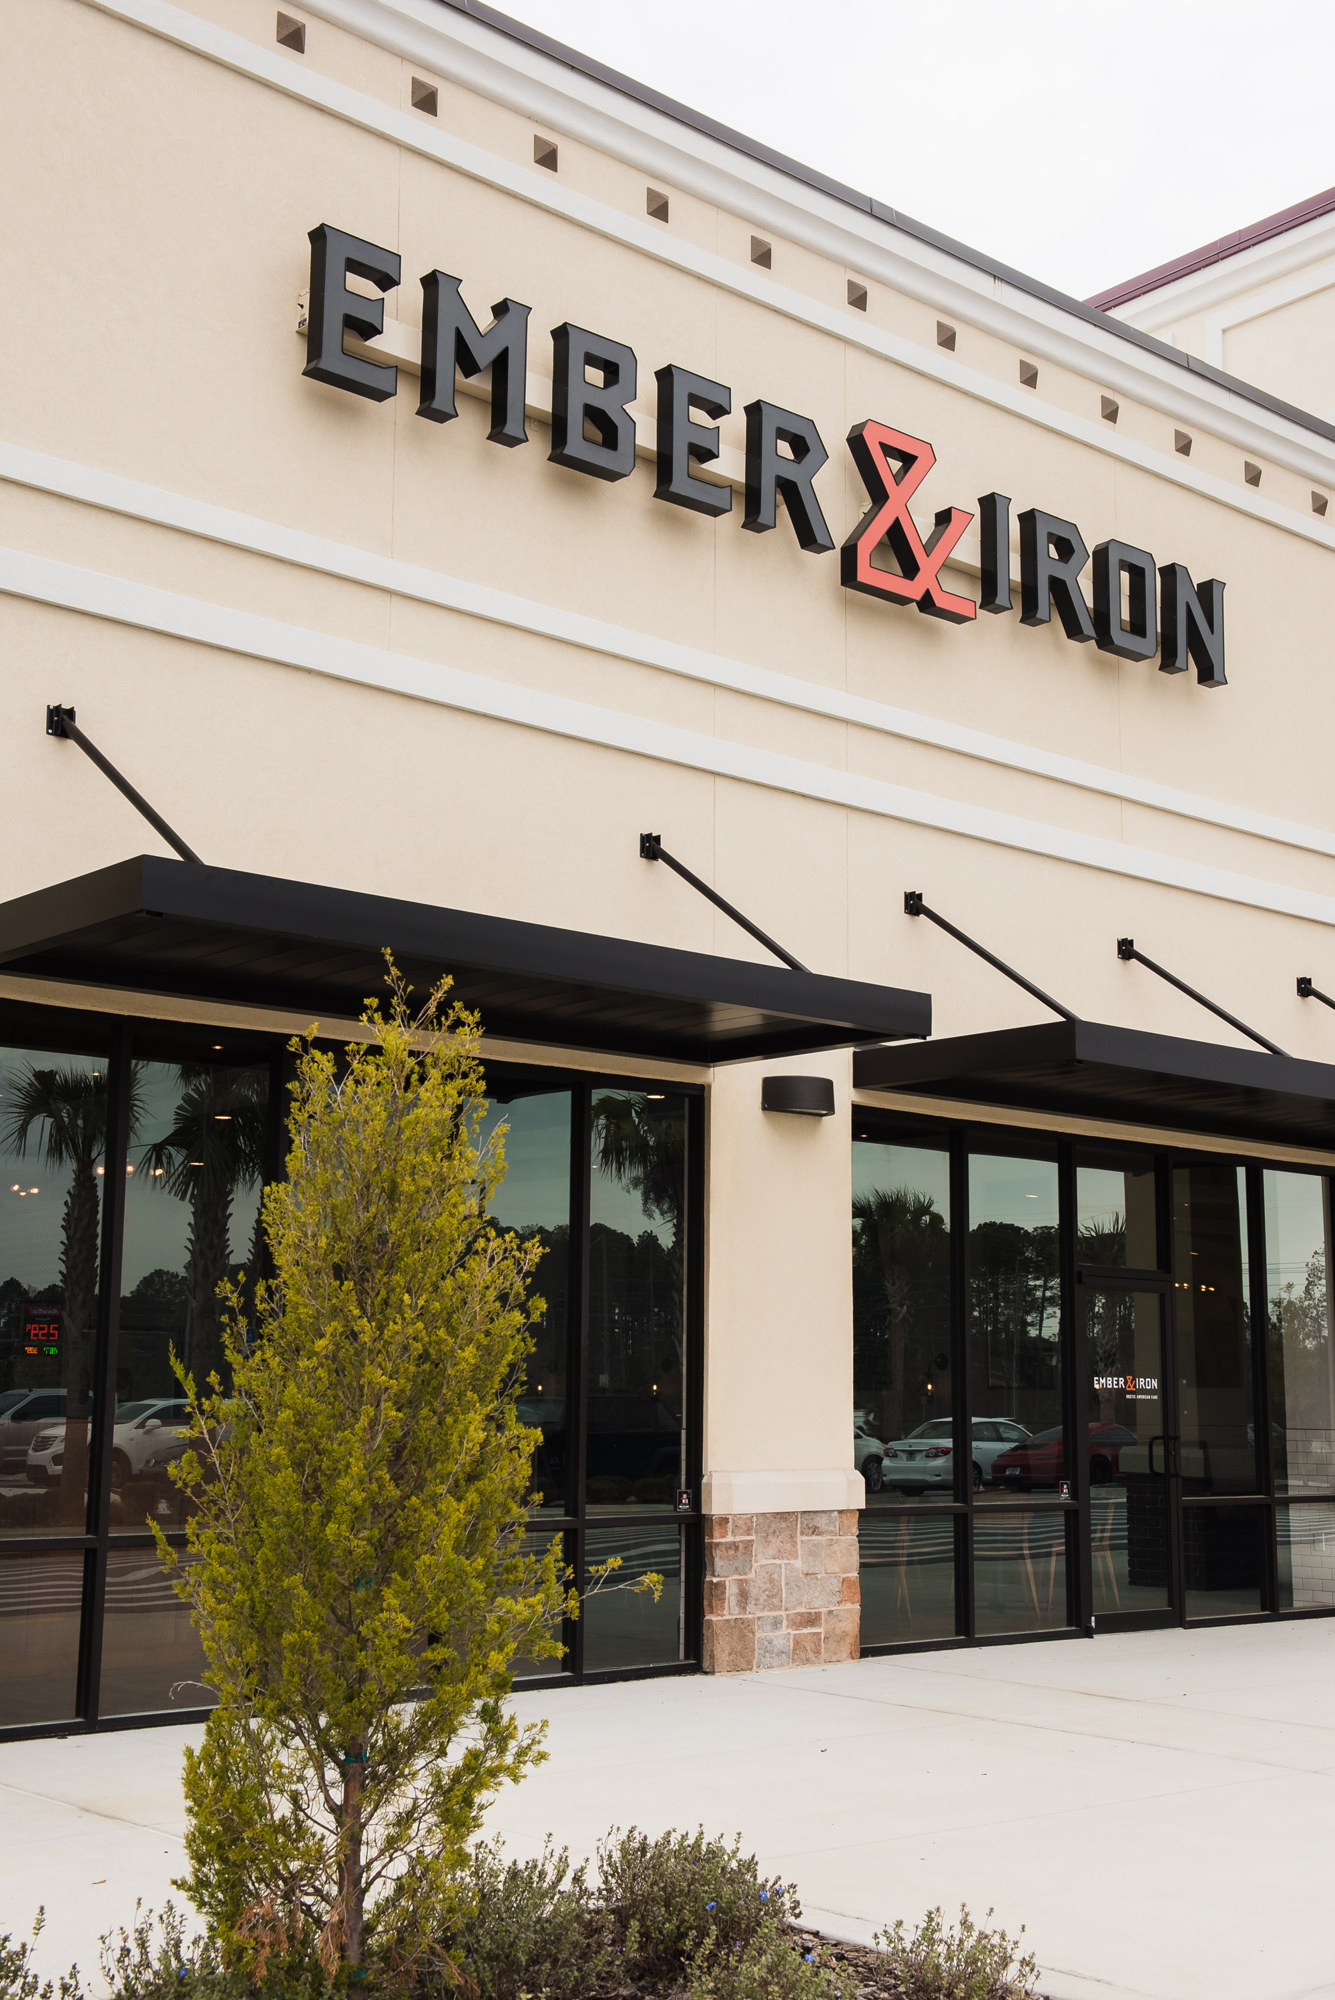 Ember & Iron is at 60 Shops Blvd., Suite 80, in the Shoppes of St. Johns Parkway.